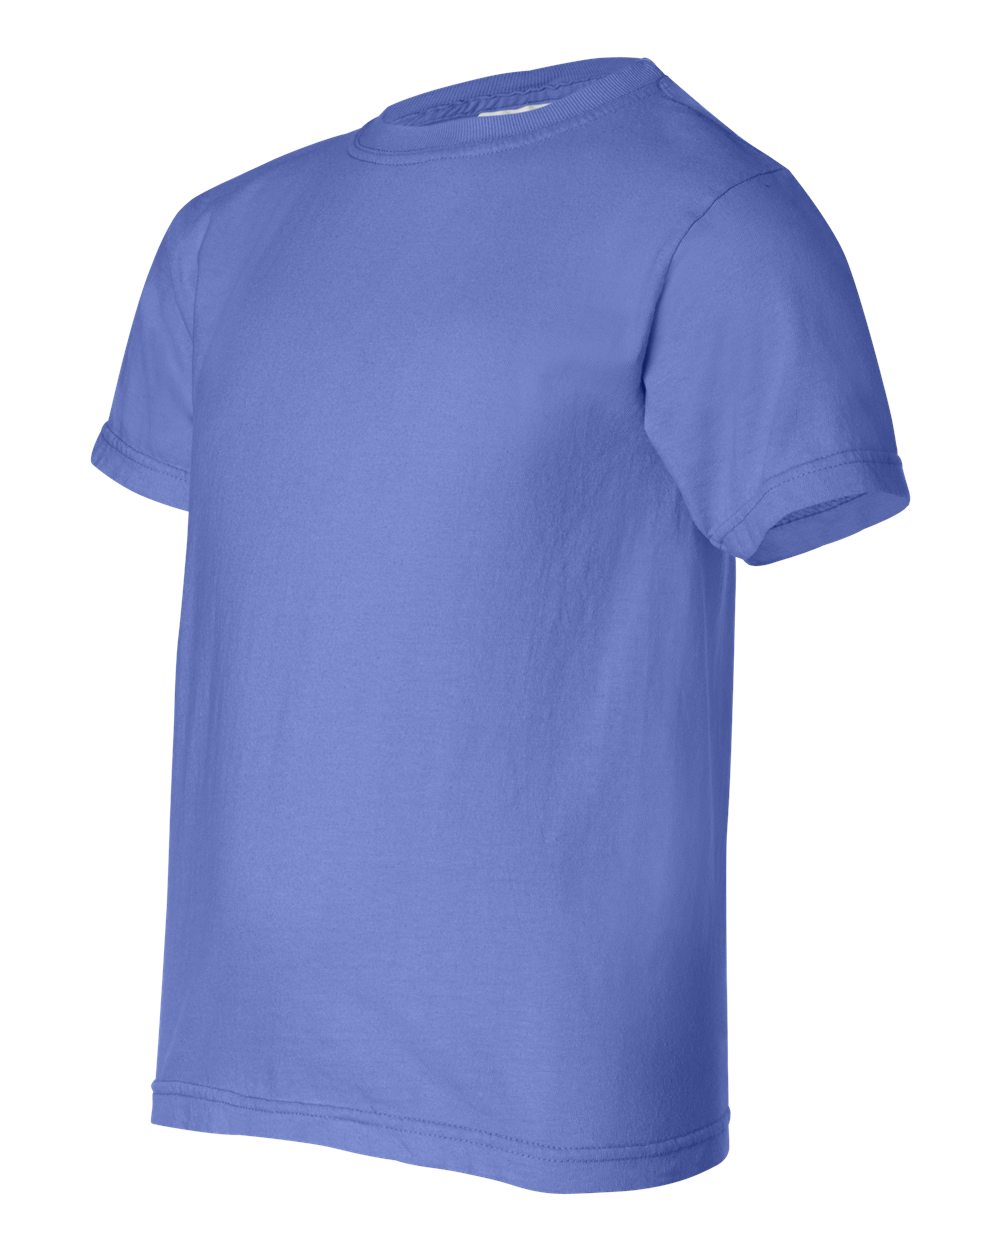 Comfort Colors 9018 - Youth Pigment-Dyed Ringspun T-Shirt